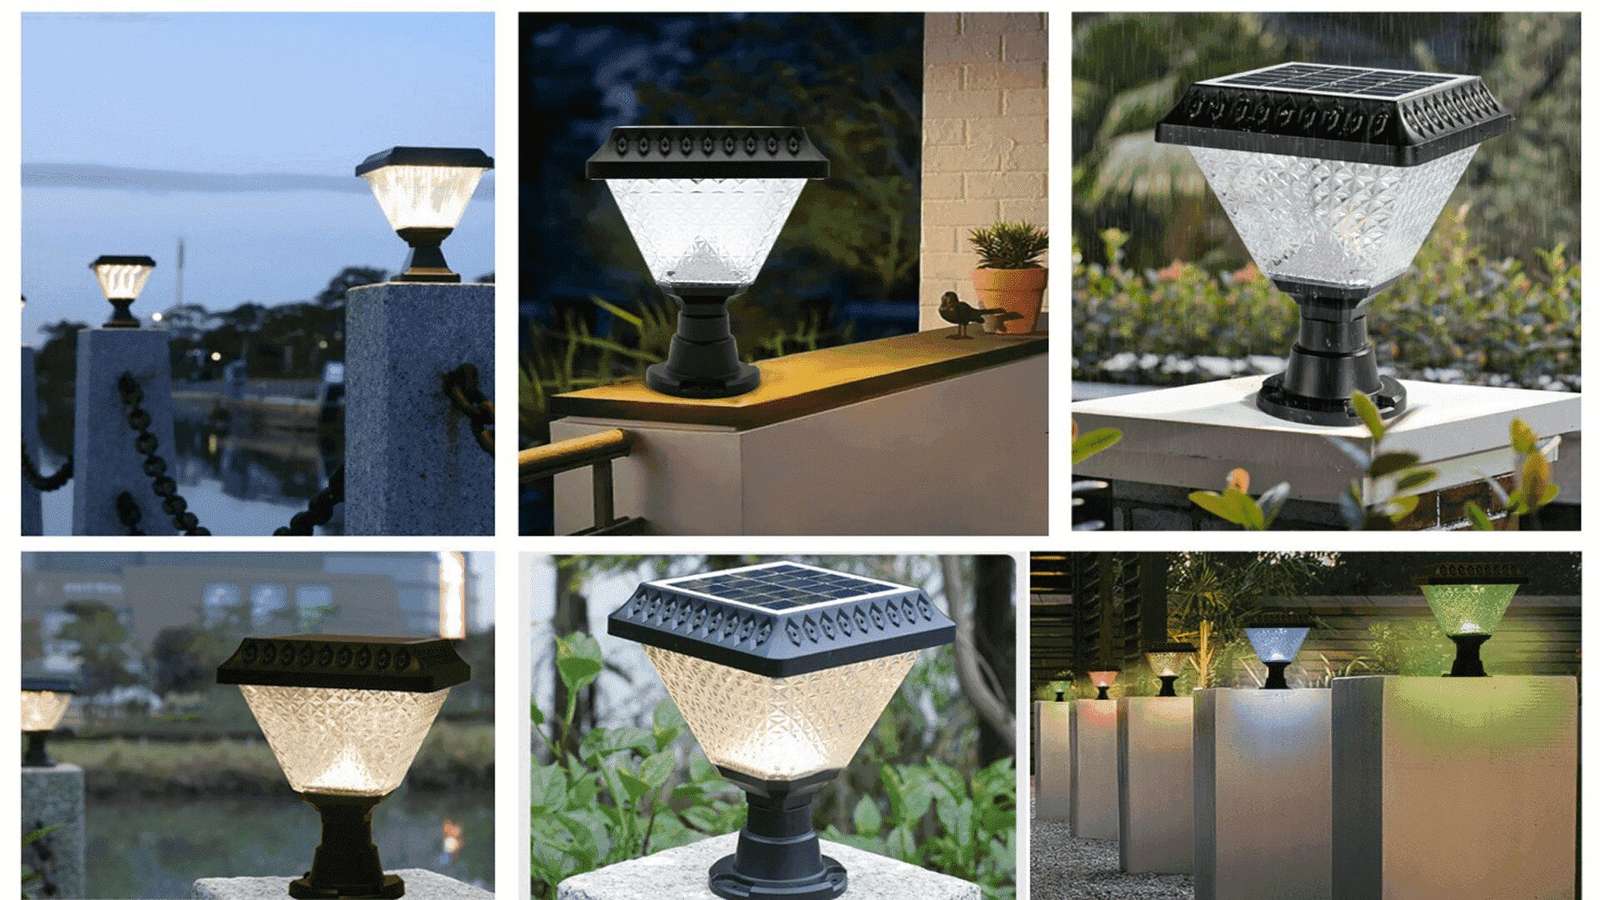 solar compound wall lights outdoor application areas